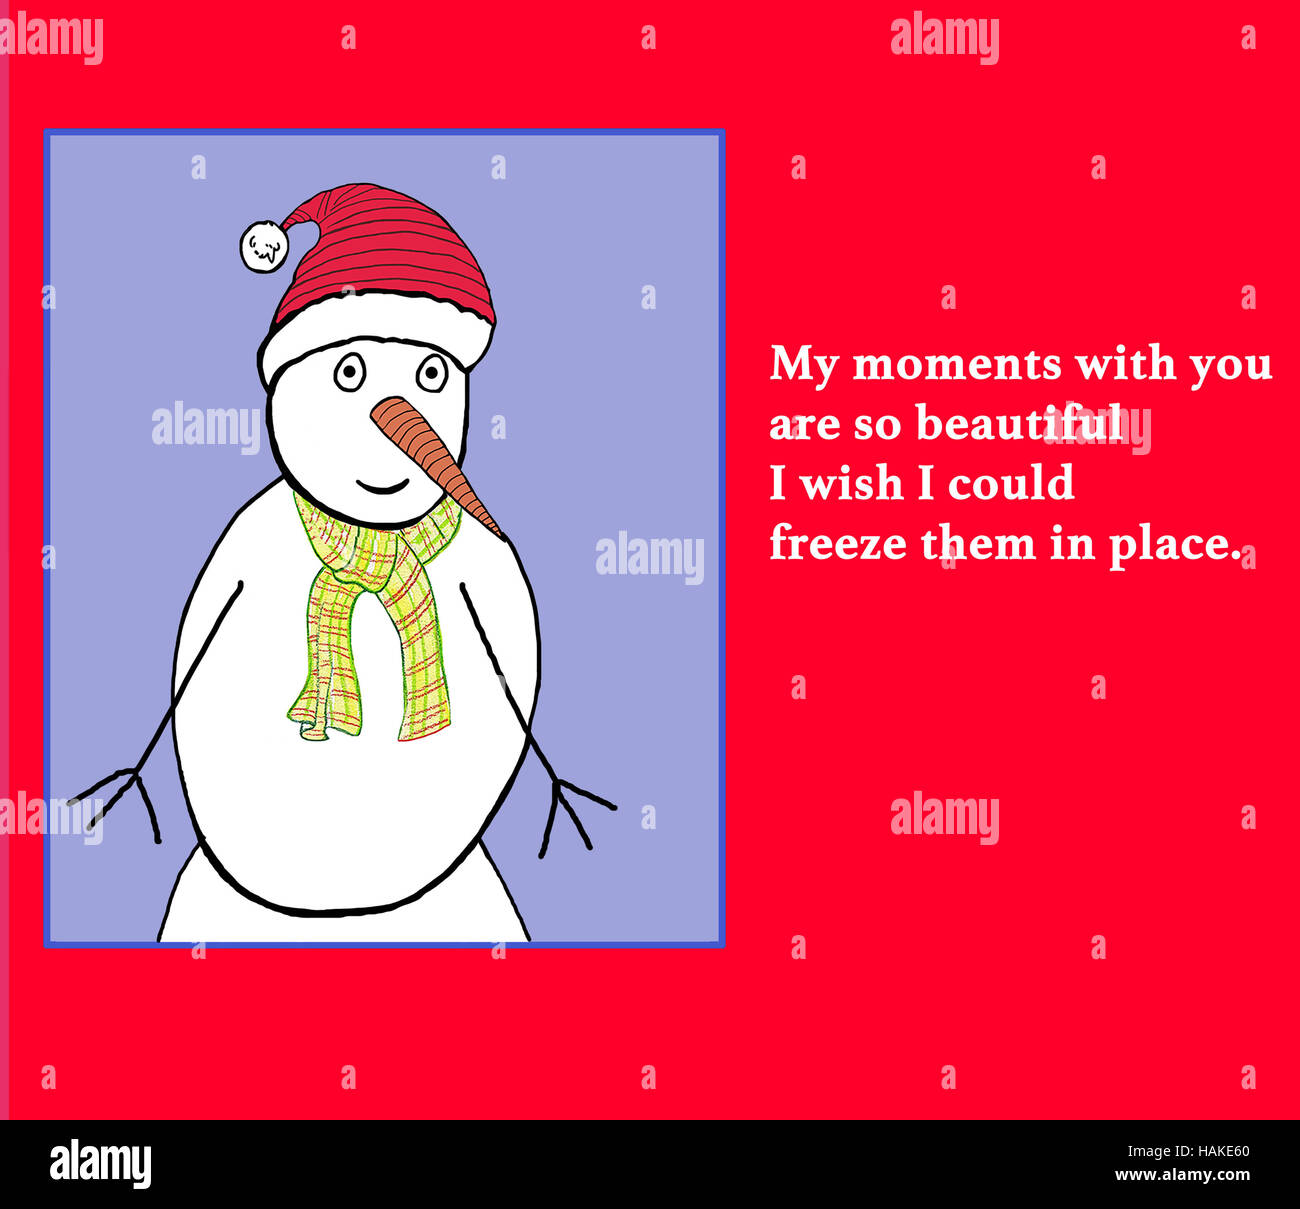 Color illustration of a snowman and a beautiful, romantic phrase. Stock Photo